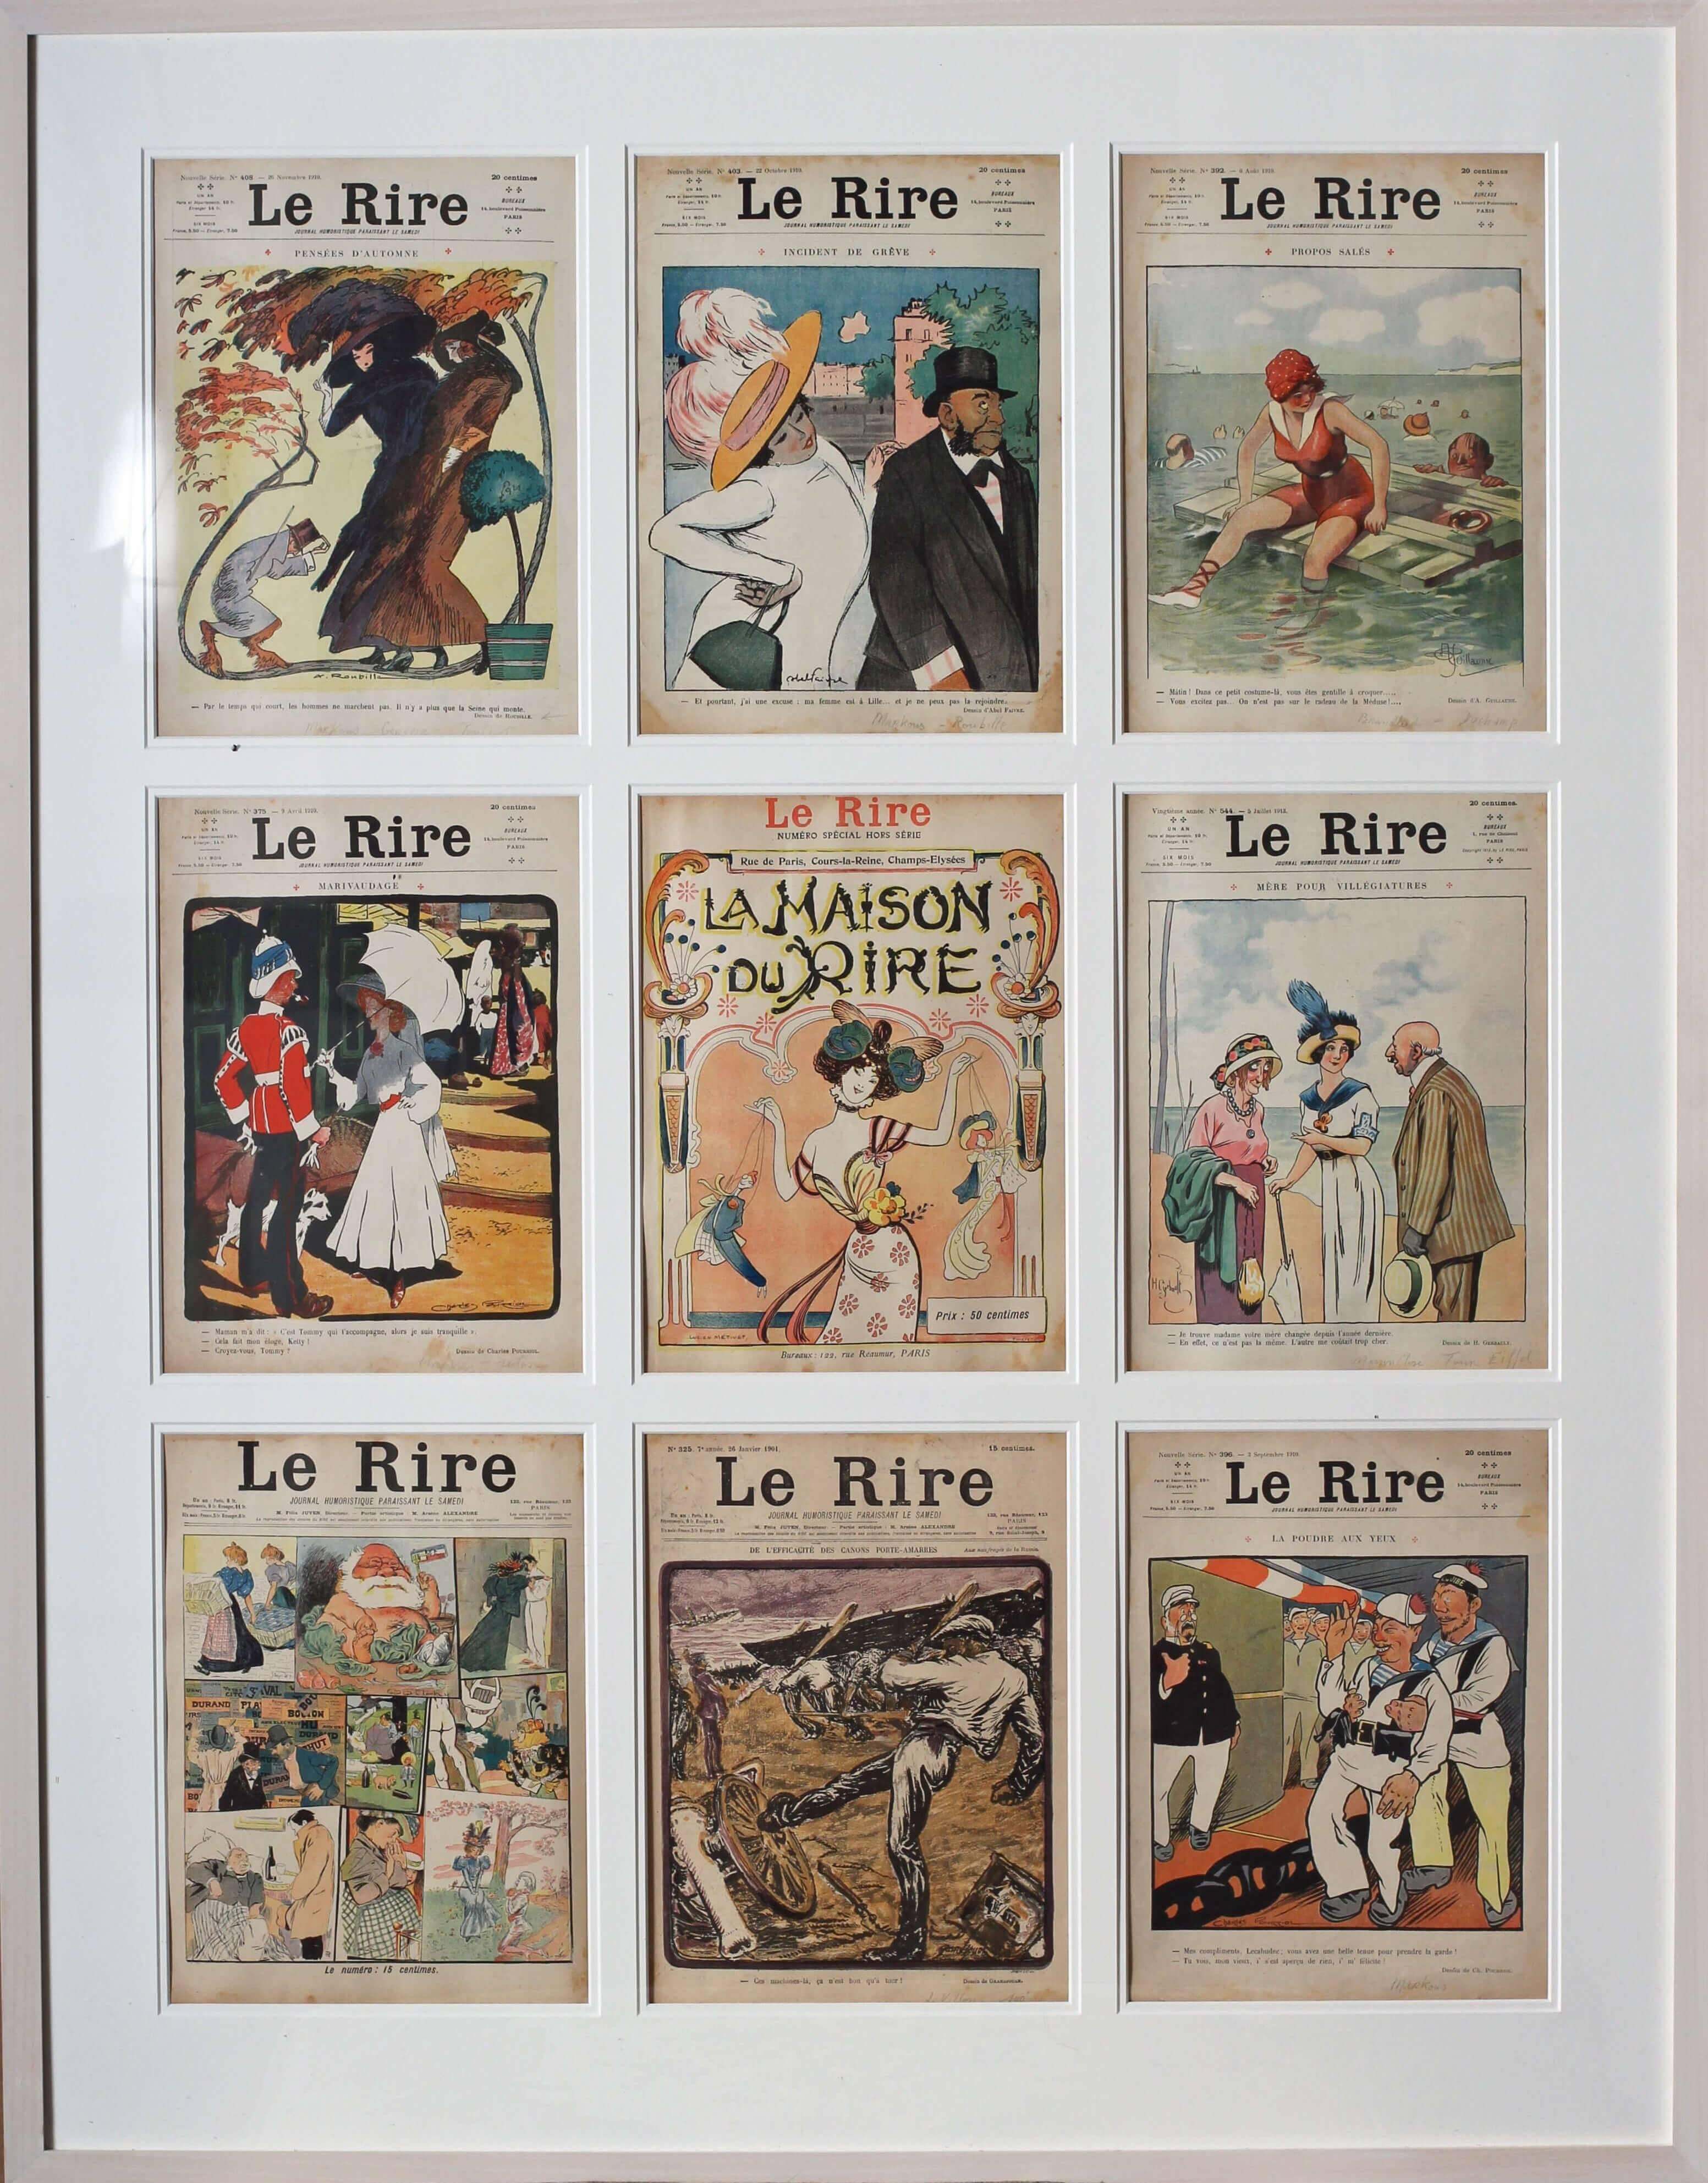 Unknown Figurative Print - Set of 9 original magazine covers from the French publication 'Le Rire'